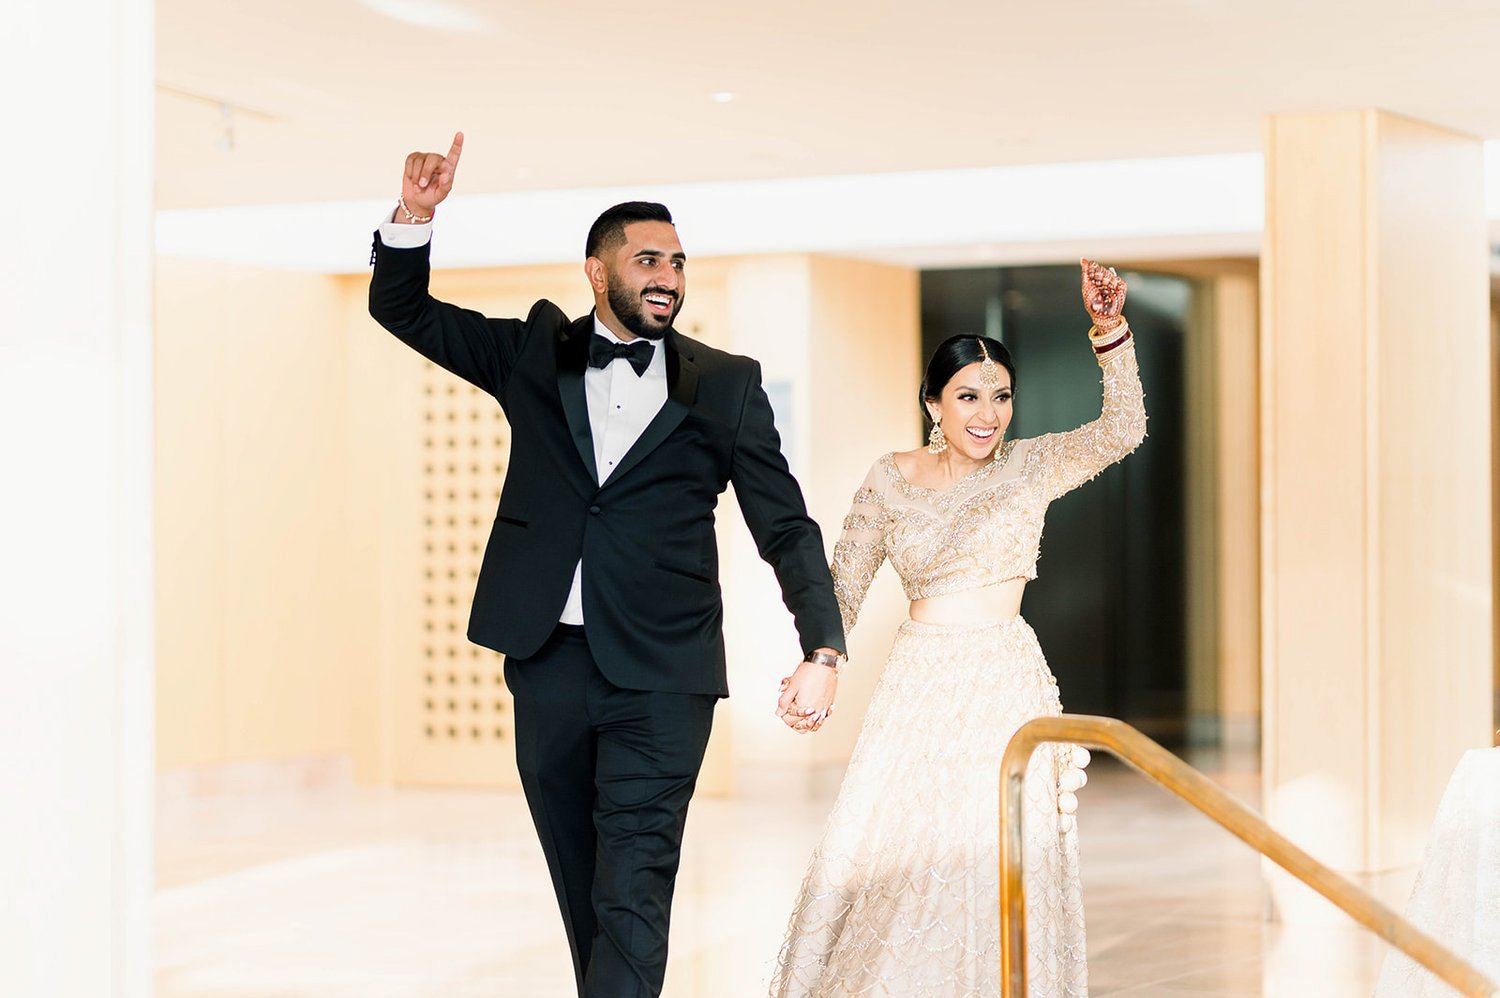 A bride and groom enter their reception in a grand entrance, hands held aloft.